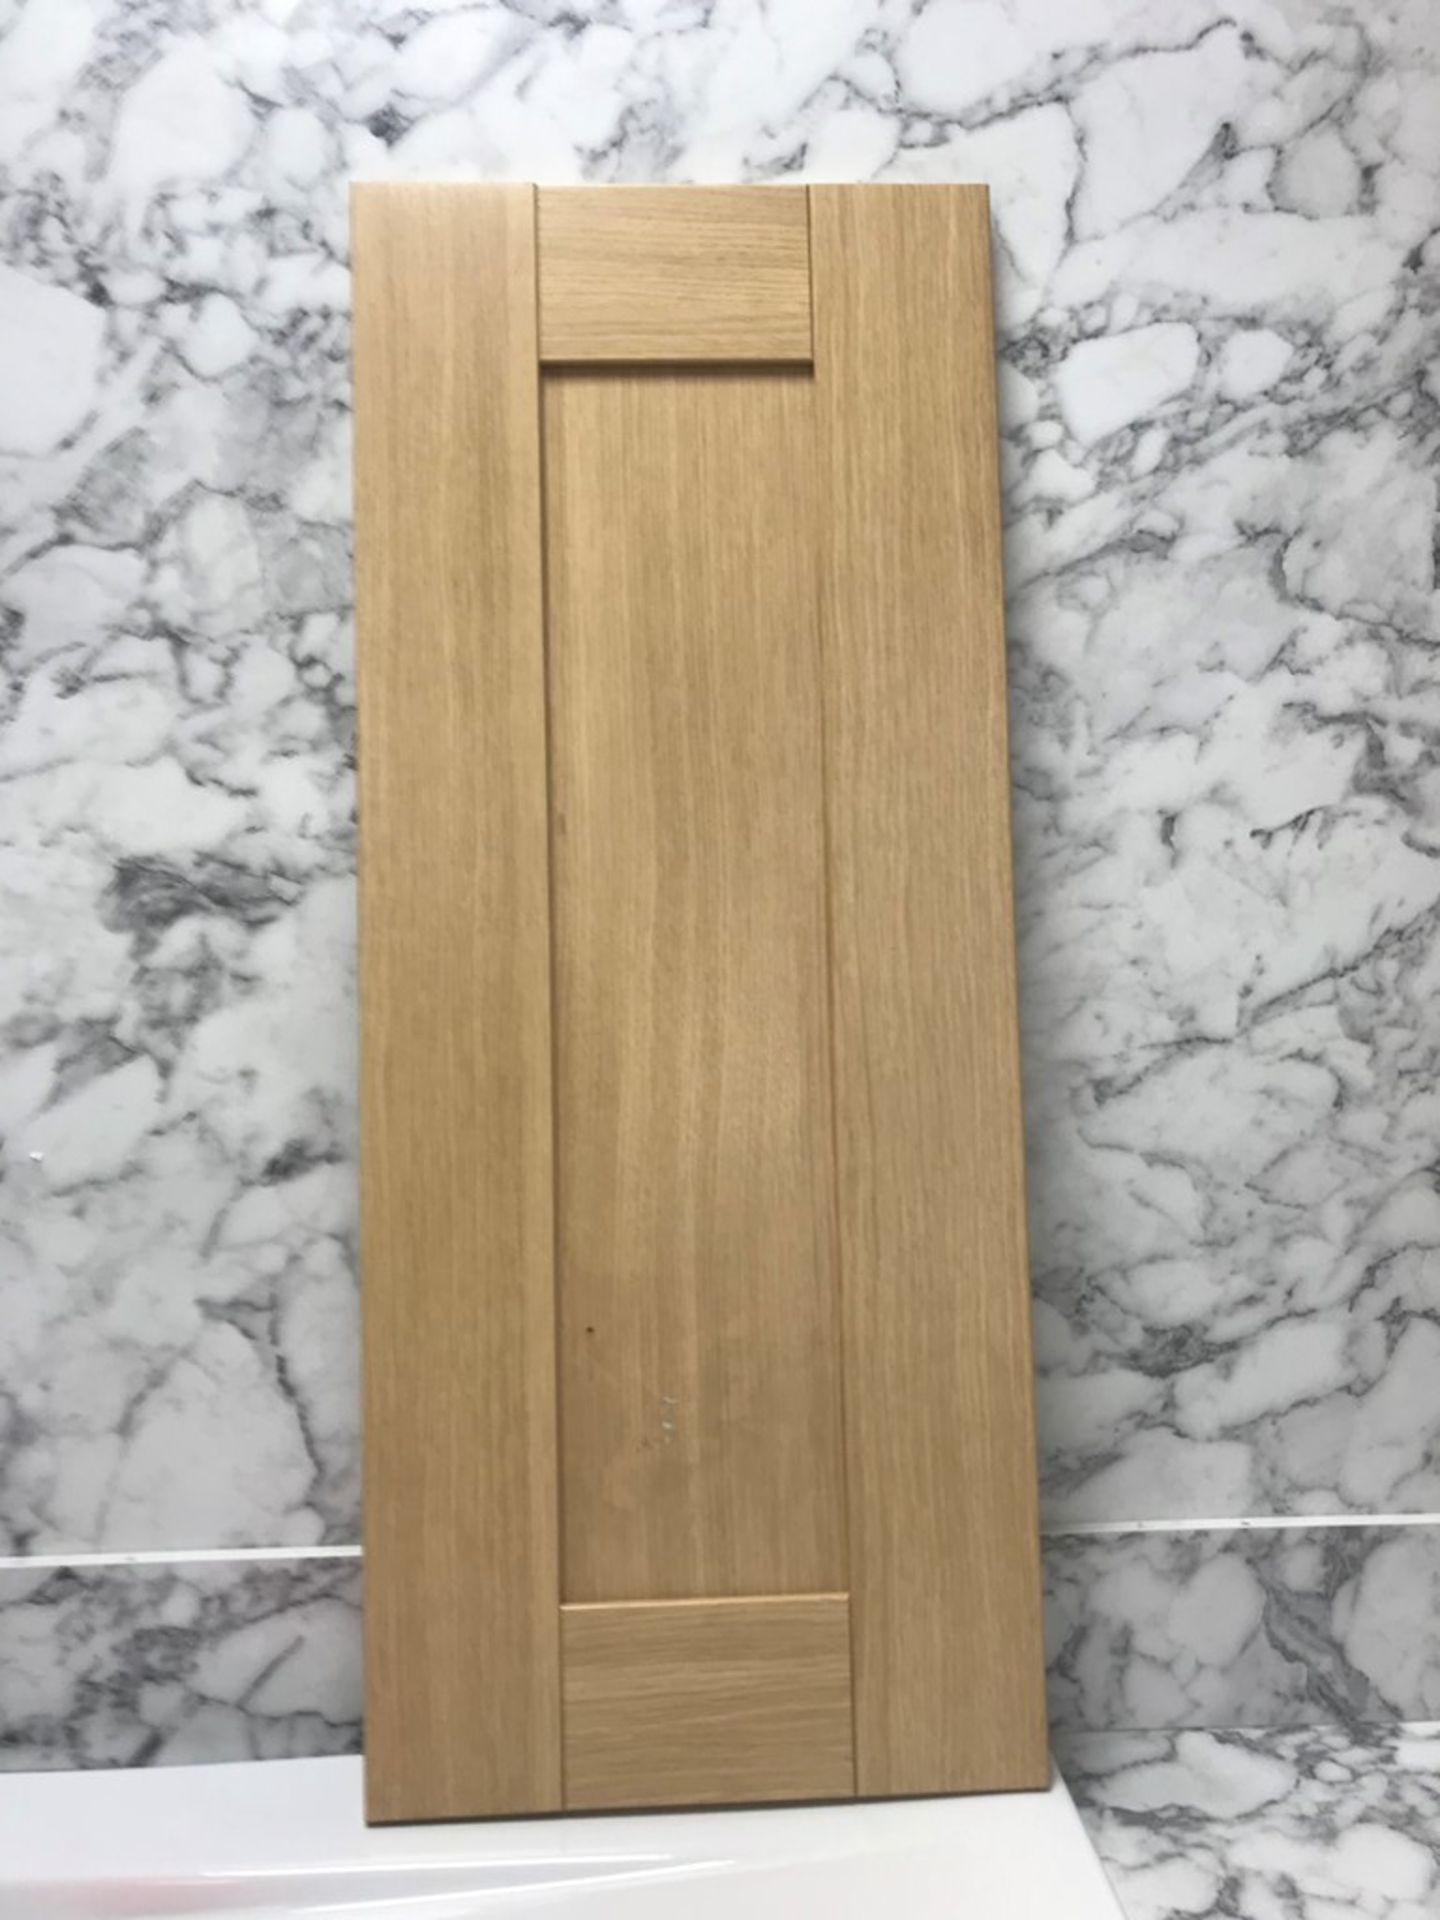 Oak shaker doors, approx. 397 items (Manifest in photos) (Collection LS12)